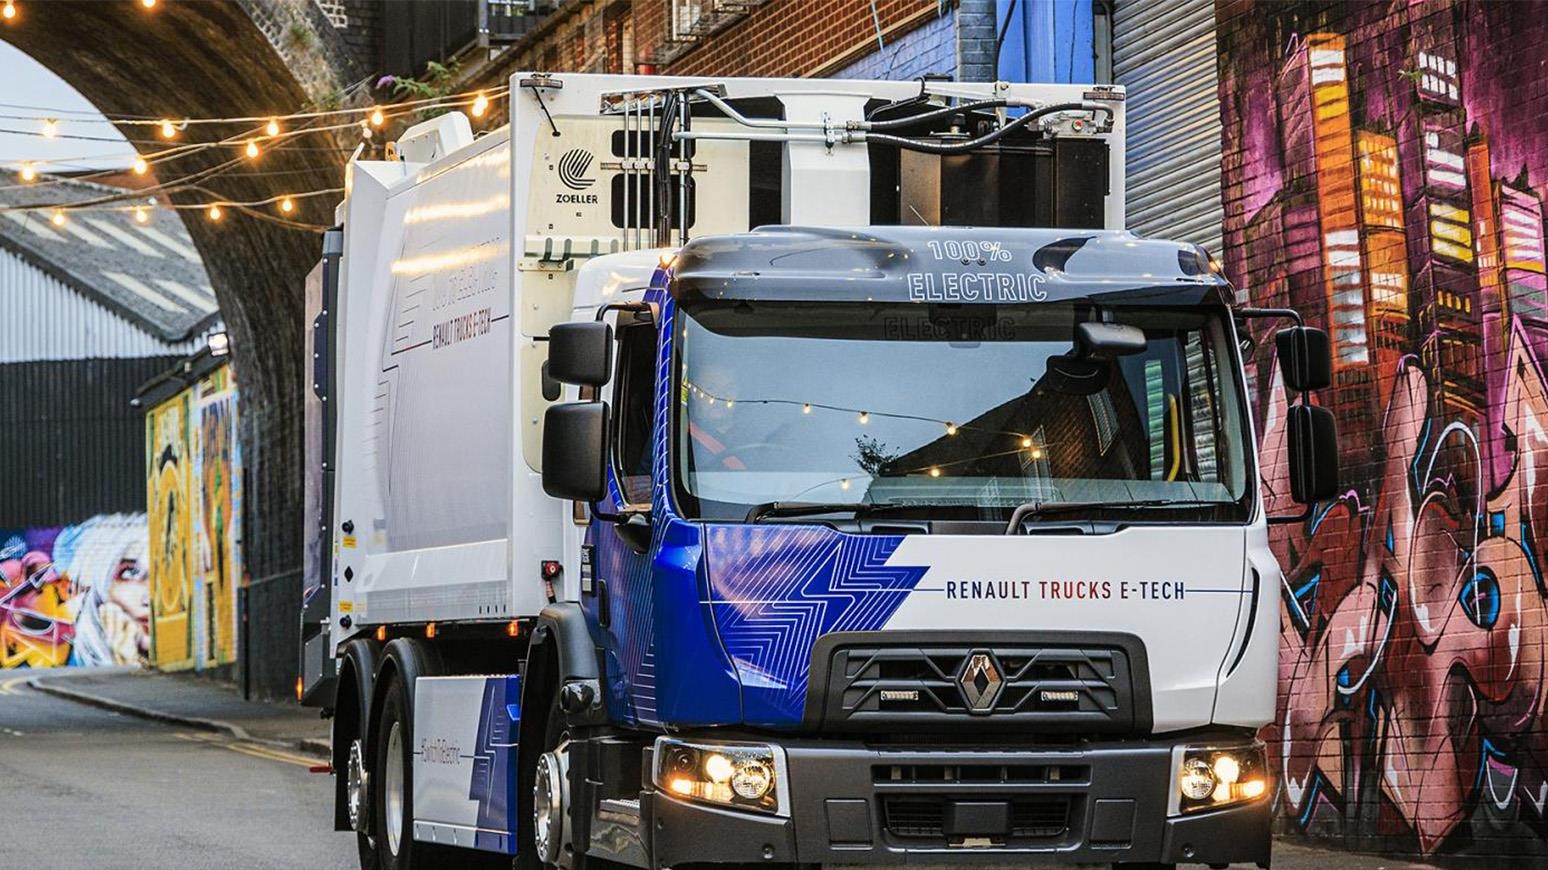 1,000 Battery-Electric Trucks Produced At The Renault Trucks Plant In Blainville-Sur-Orne